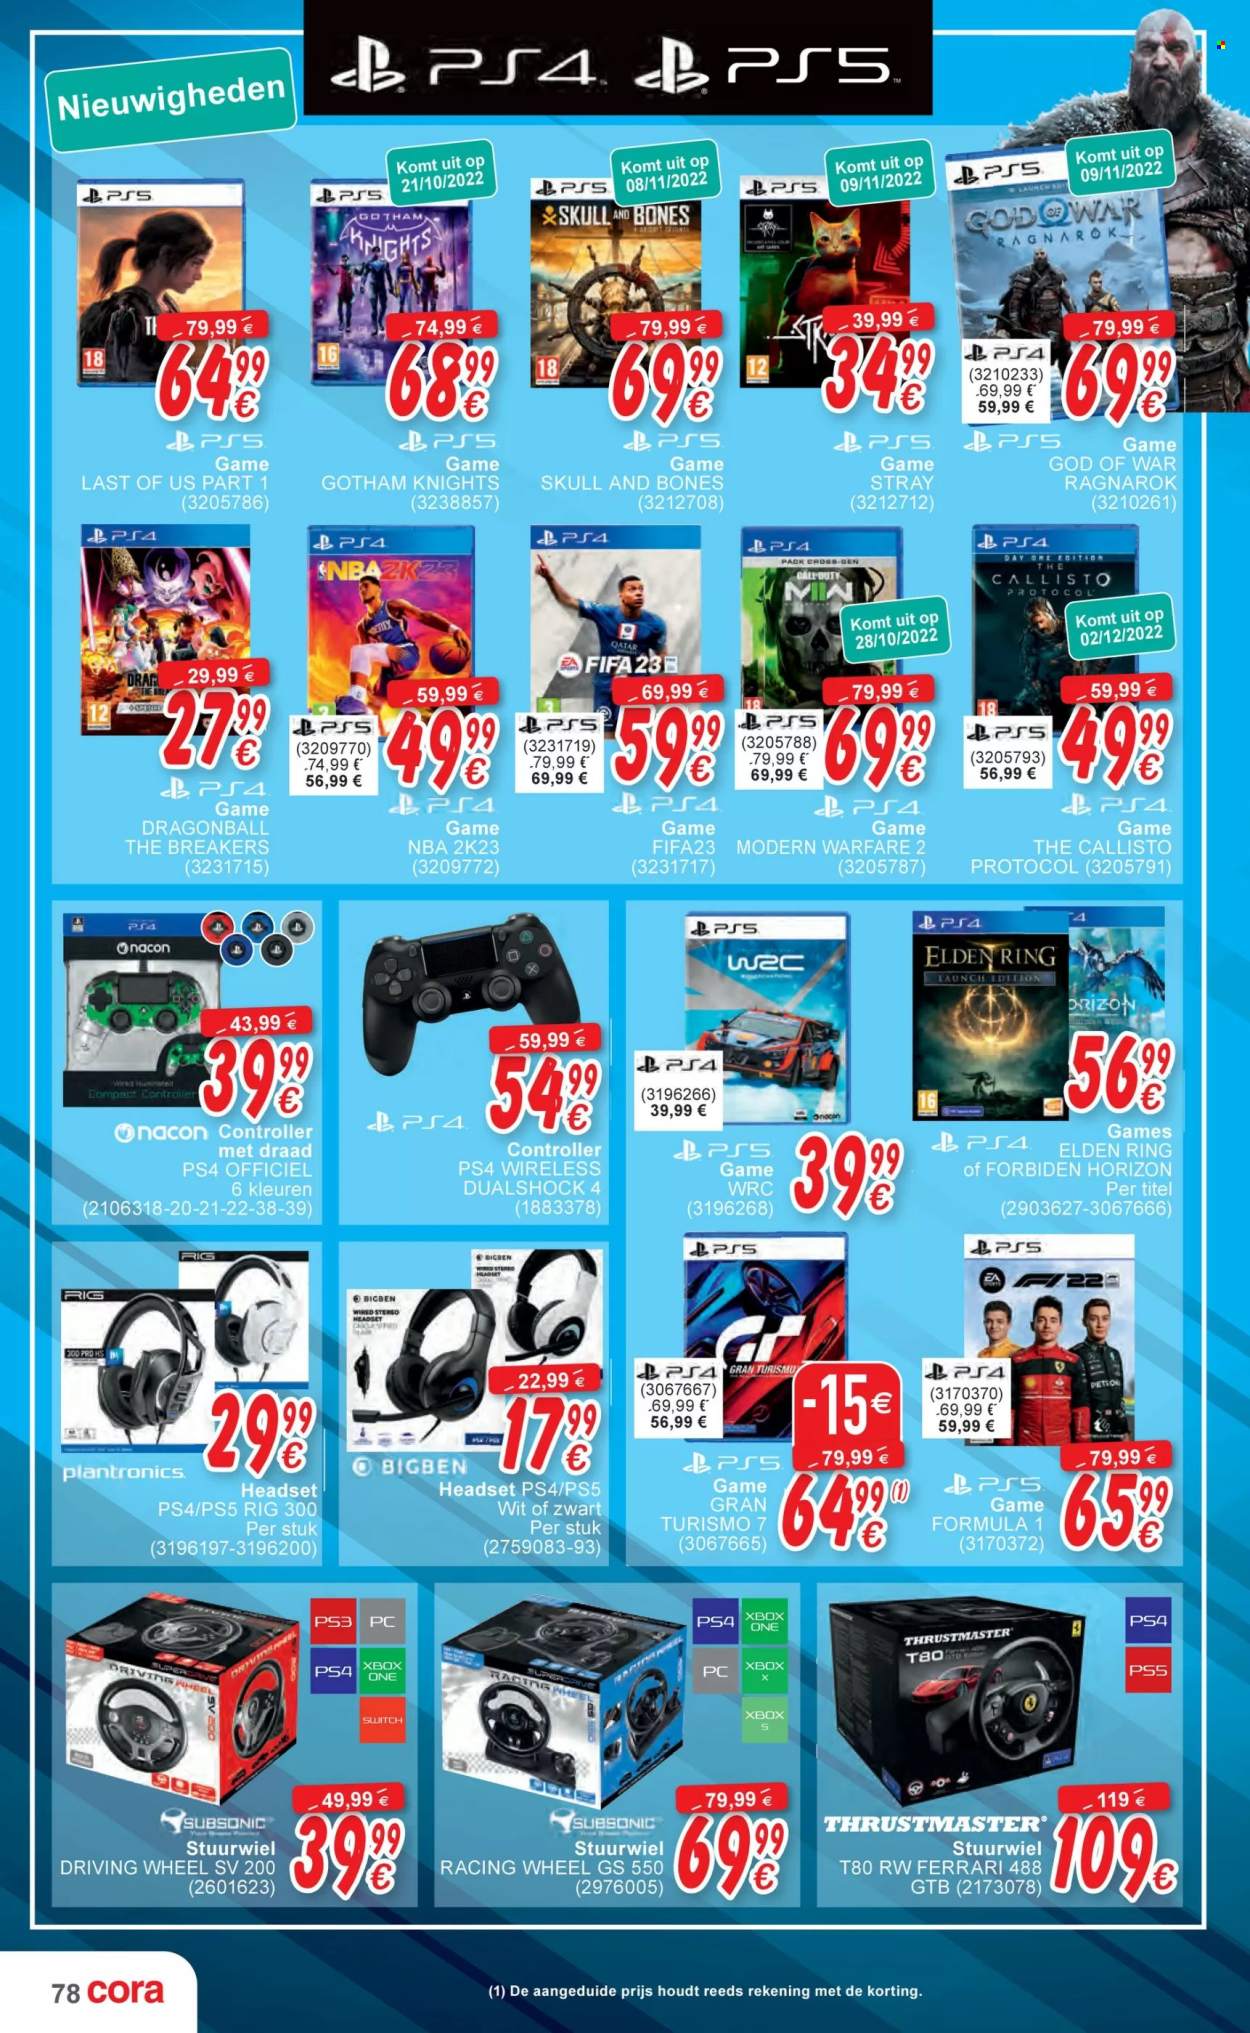 thumbnail - Cora-aanbieding - 18/10/2022 - 06/12/2022 -  producten in de aanbieding - PlayStation 4, switch, Xbox One, PlayStation 5, Xbox, Thrustmaster, controller, headset, ring, stuurwiel, computer. Pagina 40.